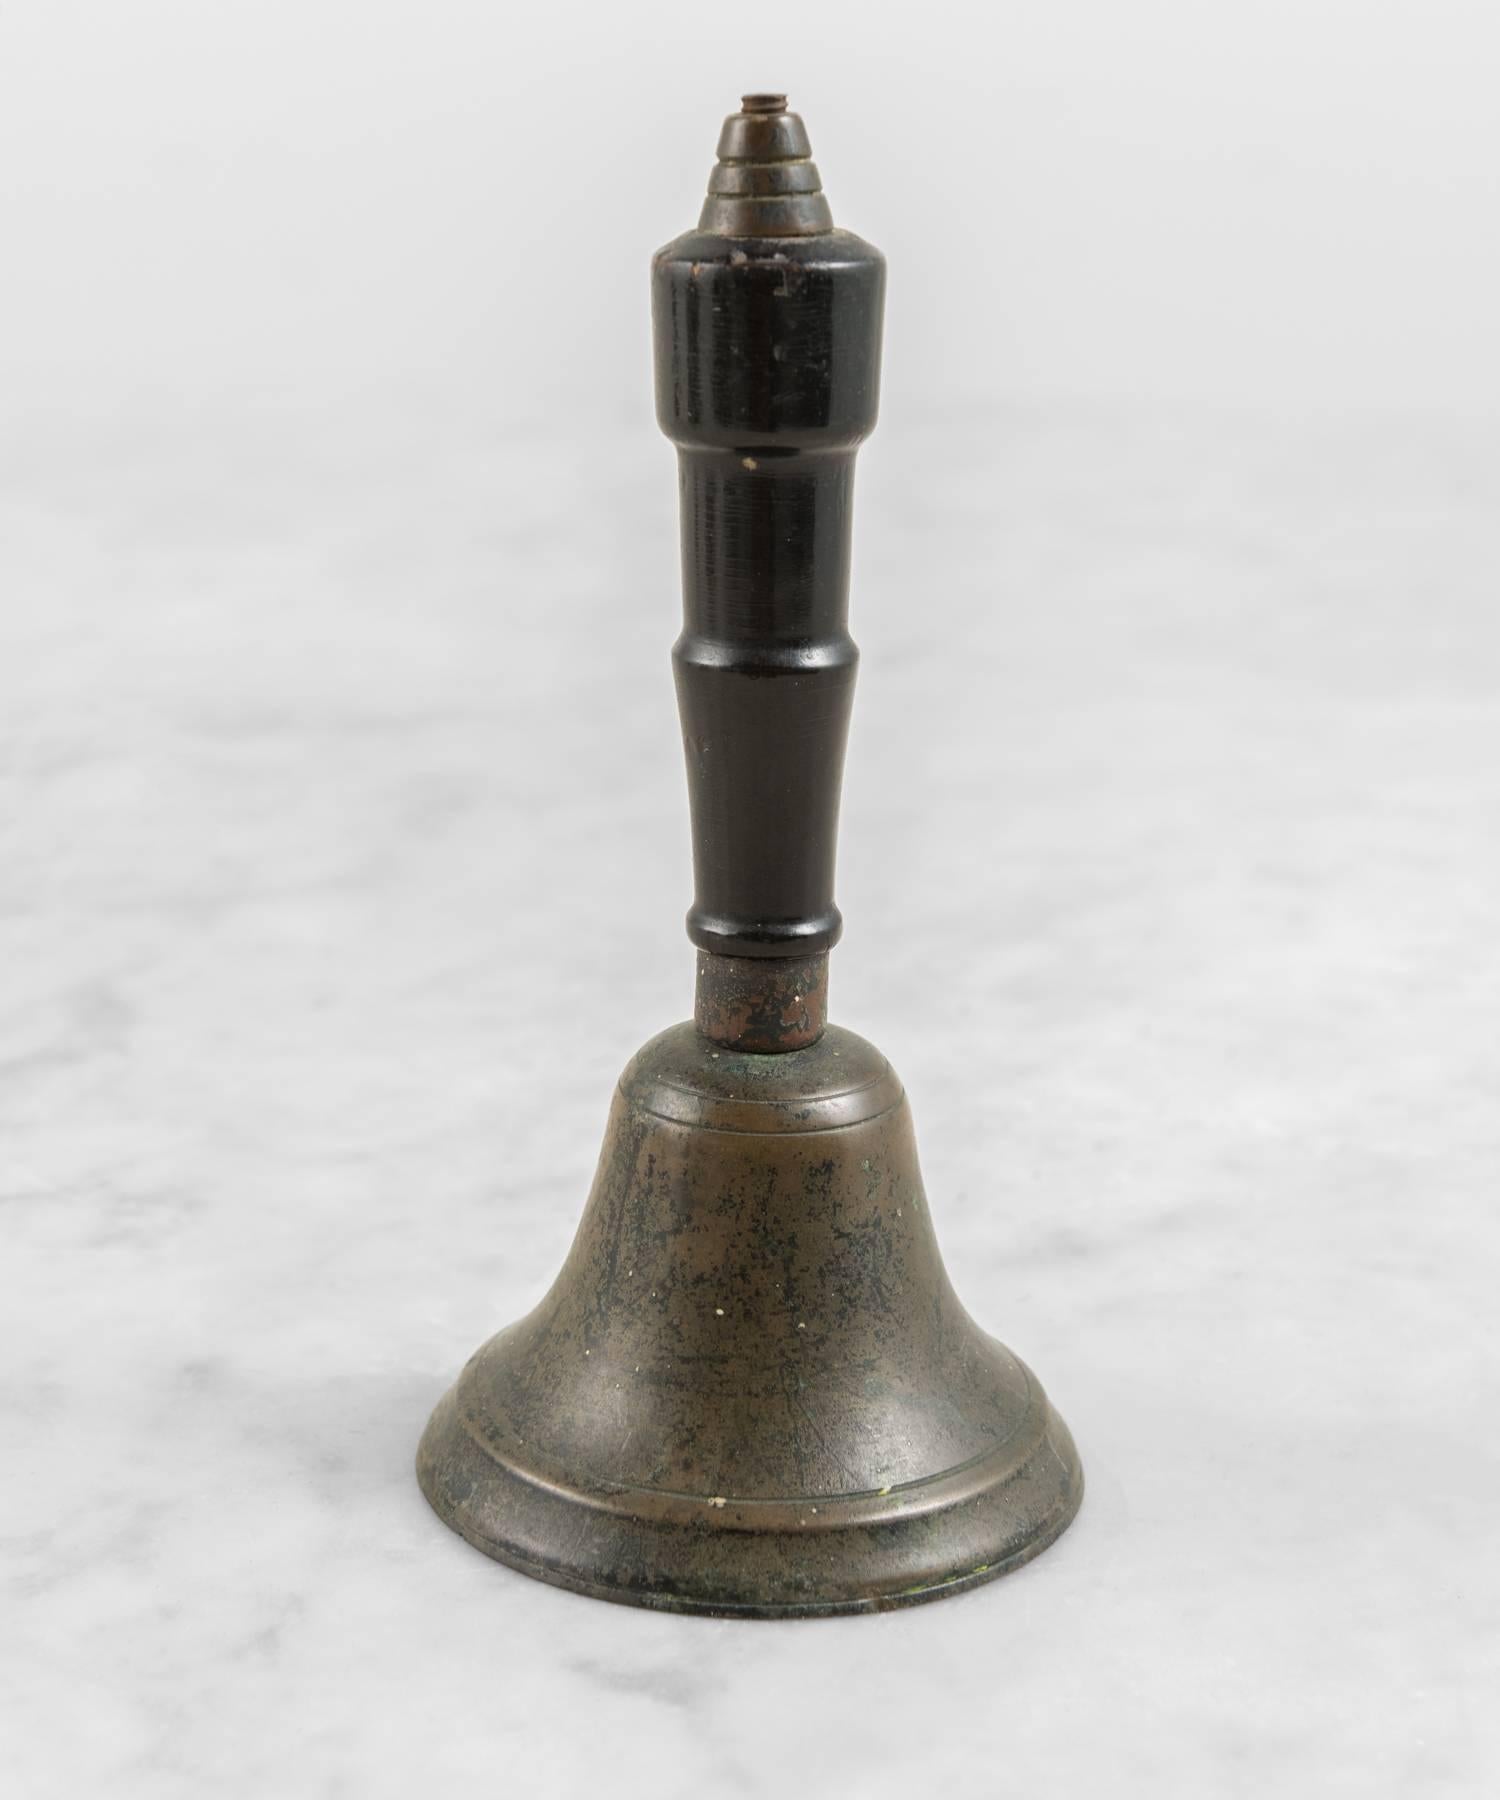 Ebonized Small Sized Bell with Wooden Handle, circa 1900-1940